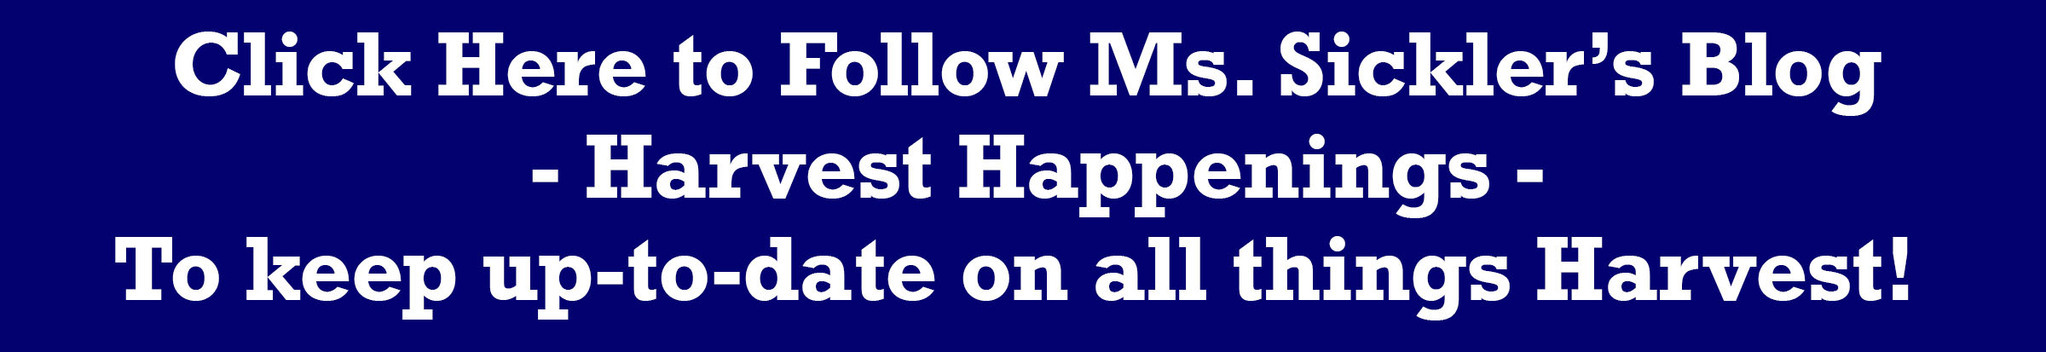 Click here to follow Ms. Sickler's blog harvest happenings to keep up to date on all things harvest